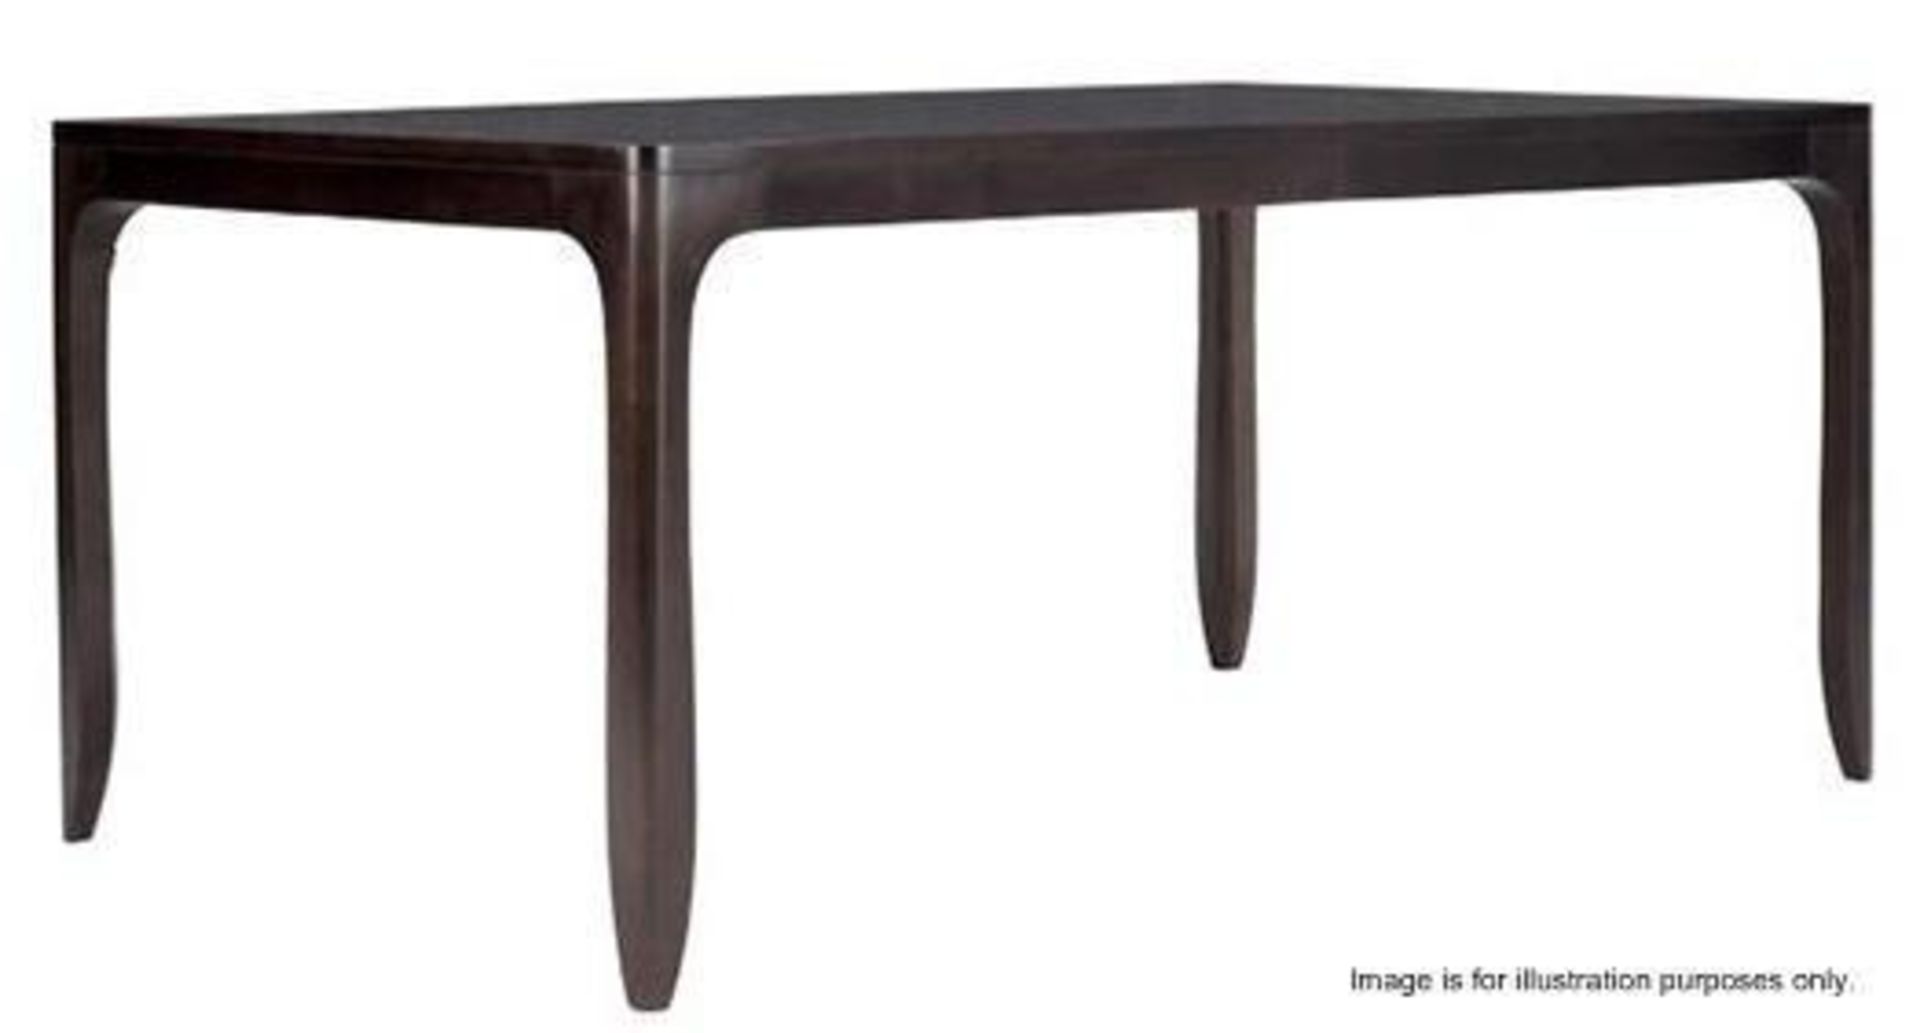 1 x BARBARA BARRY "Perfect Parsons" Dining Table In Dark Walnut - Includes Extensions Leaves - 2.8 M - Image 10 of 17